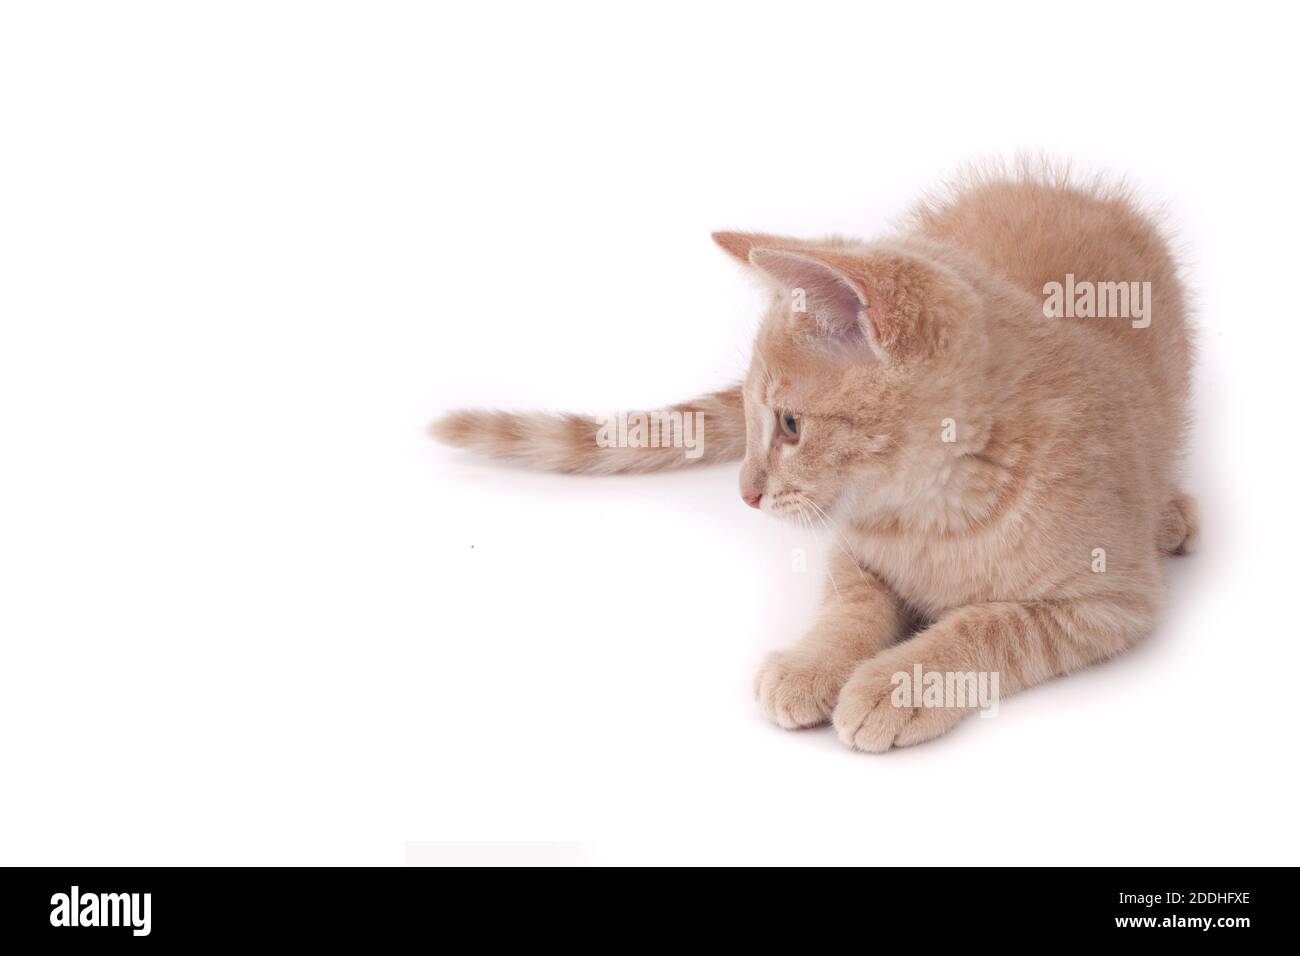 A studio photo of a ginger kitten sat against a white background Stock Photo